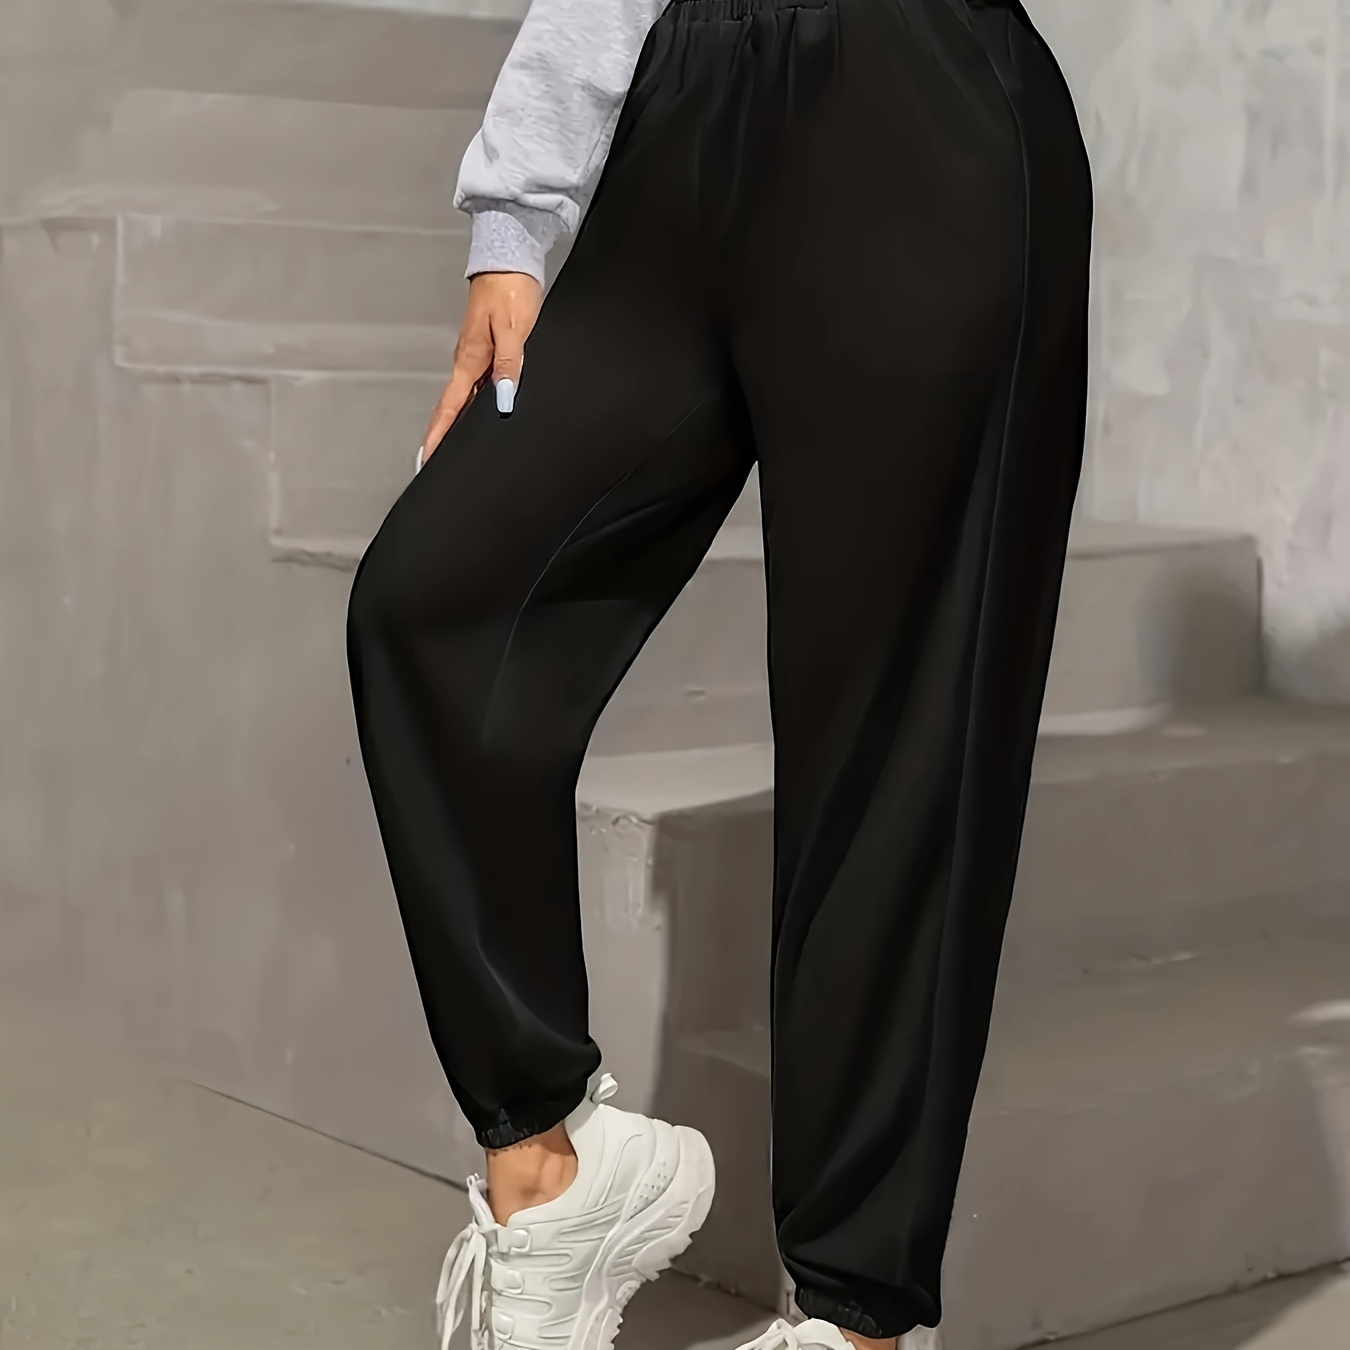 Solid Color Casual Sweatpants, Drawstring Elastic Waist Jogger Running  Pants, Women's Athleisure